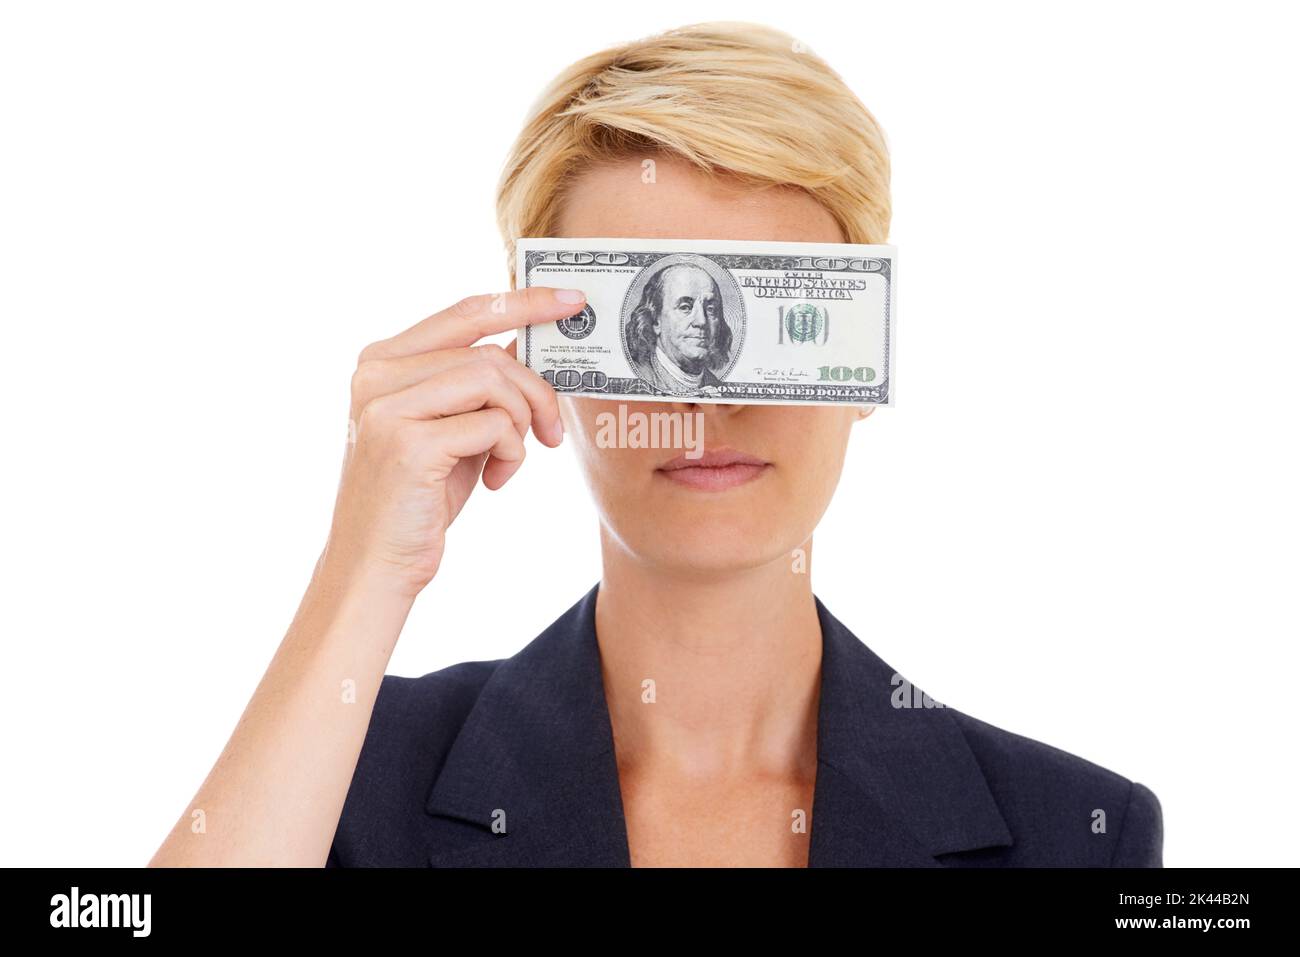 Money conceals everything. A young businesswoman holding a 100 dollar bill in front of her eyes. Stock Photo